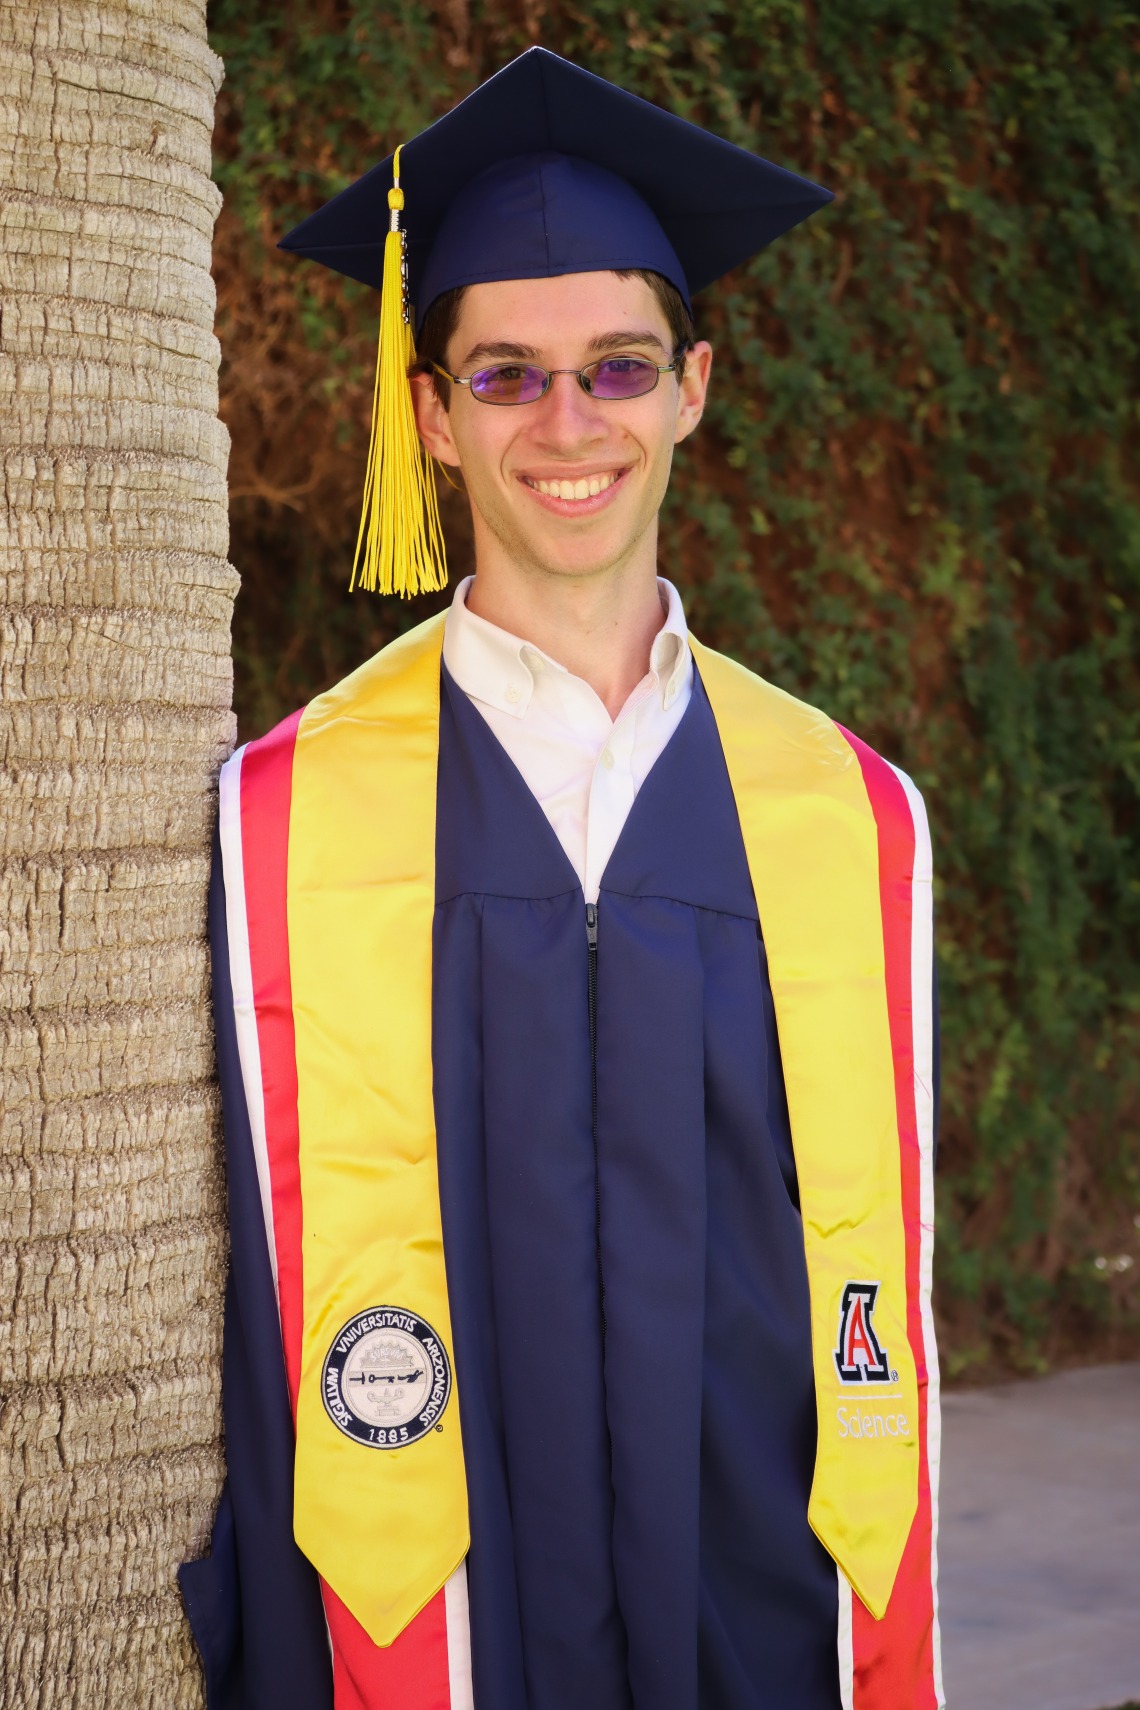 David Jurkowitz wearing a graduation cap and gown